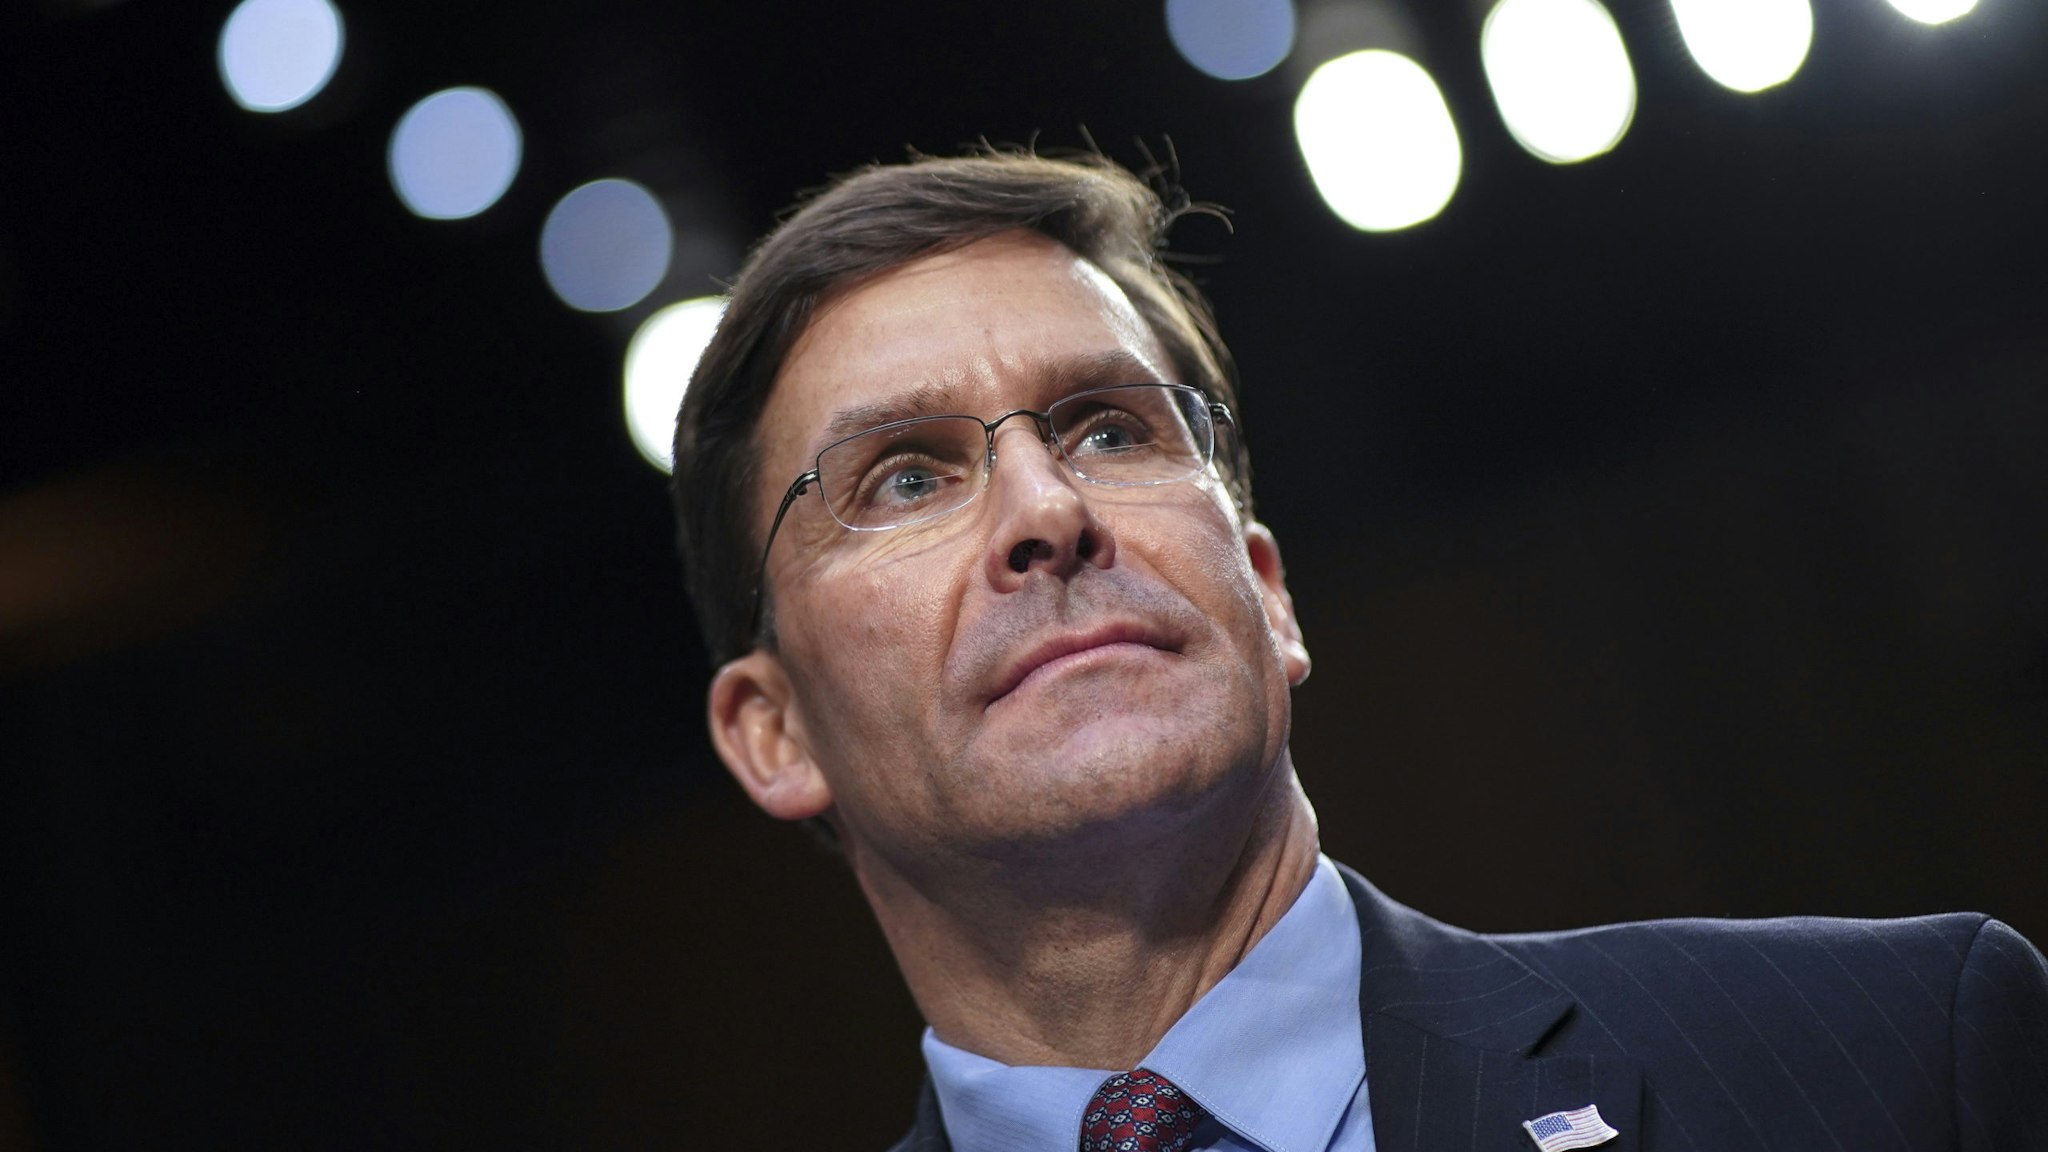 WASHINGTON, DC - MARCH 04: U.S. Secretary of Defense Mark Esper testifies during a Senate Armed Services Committee hearing concerning the Department of Defense budget in the Hart Senate Office Building on March 4, 2020 in Washington, DC. Esper and Milley testified about the Defense Authorization Request for Fiscal Year 2021 and the Future Years Defense Program.